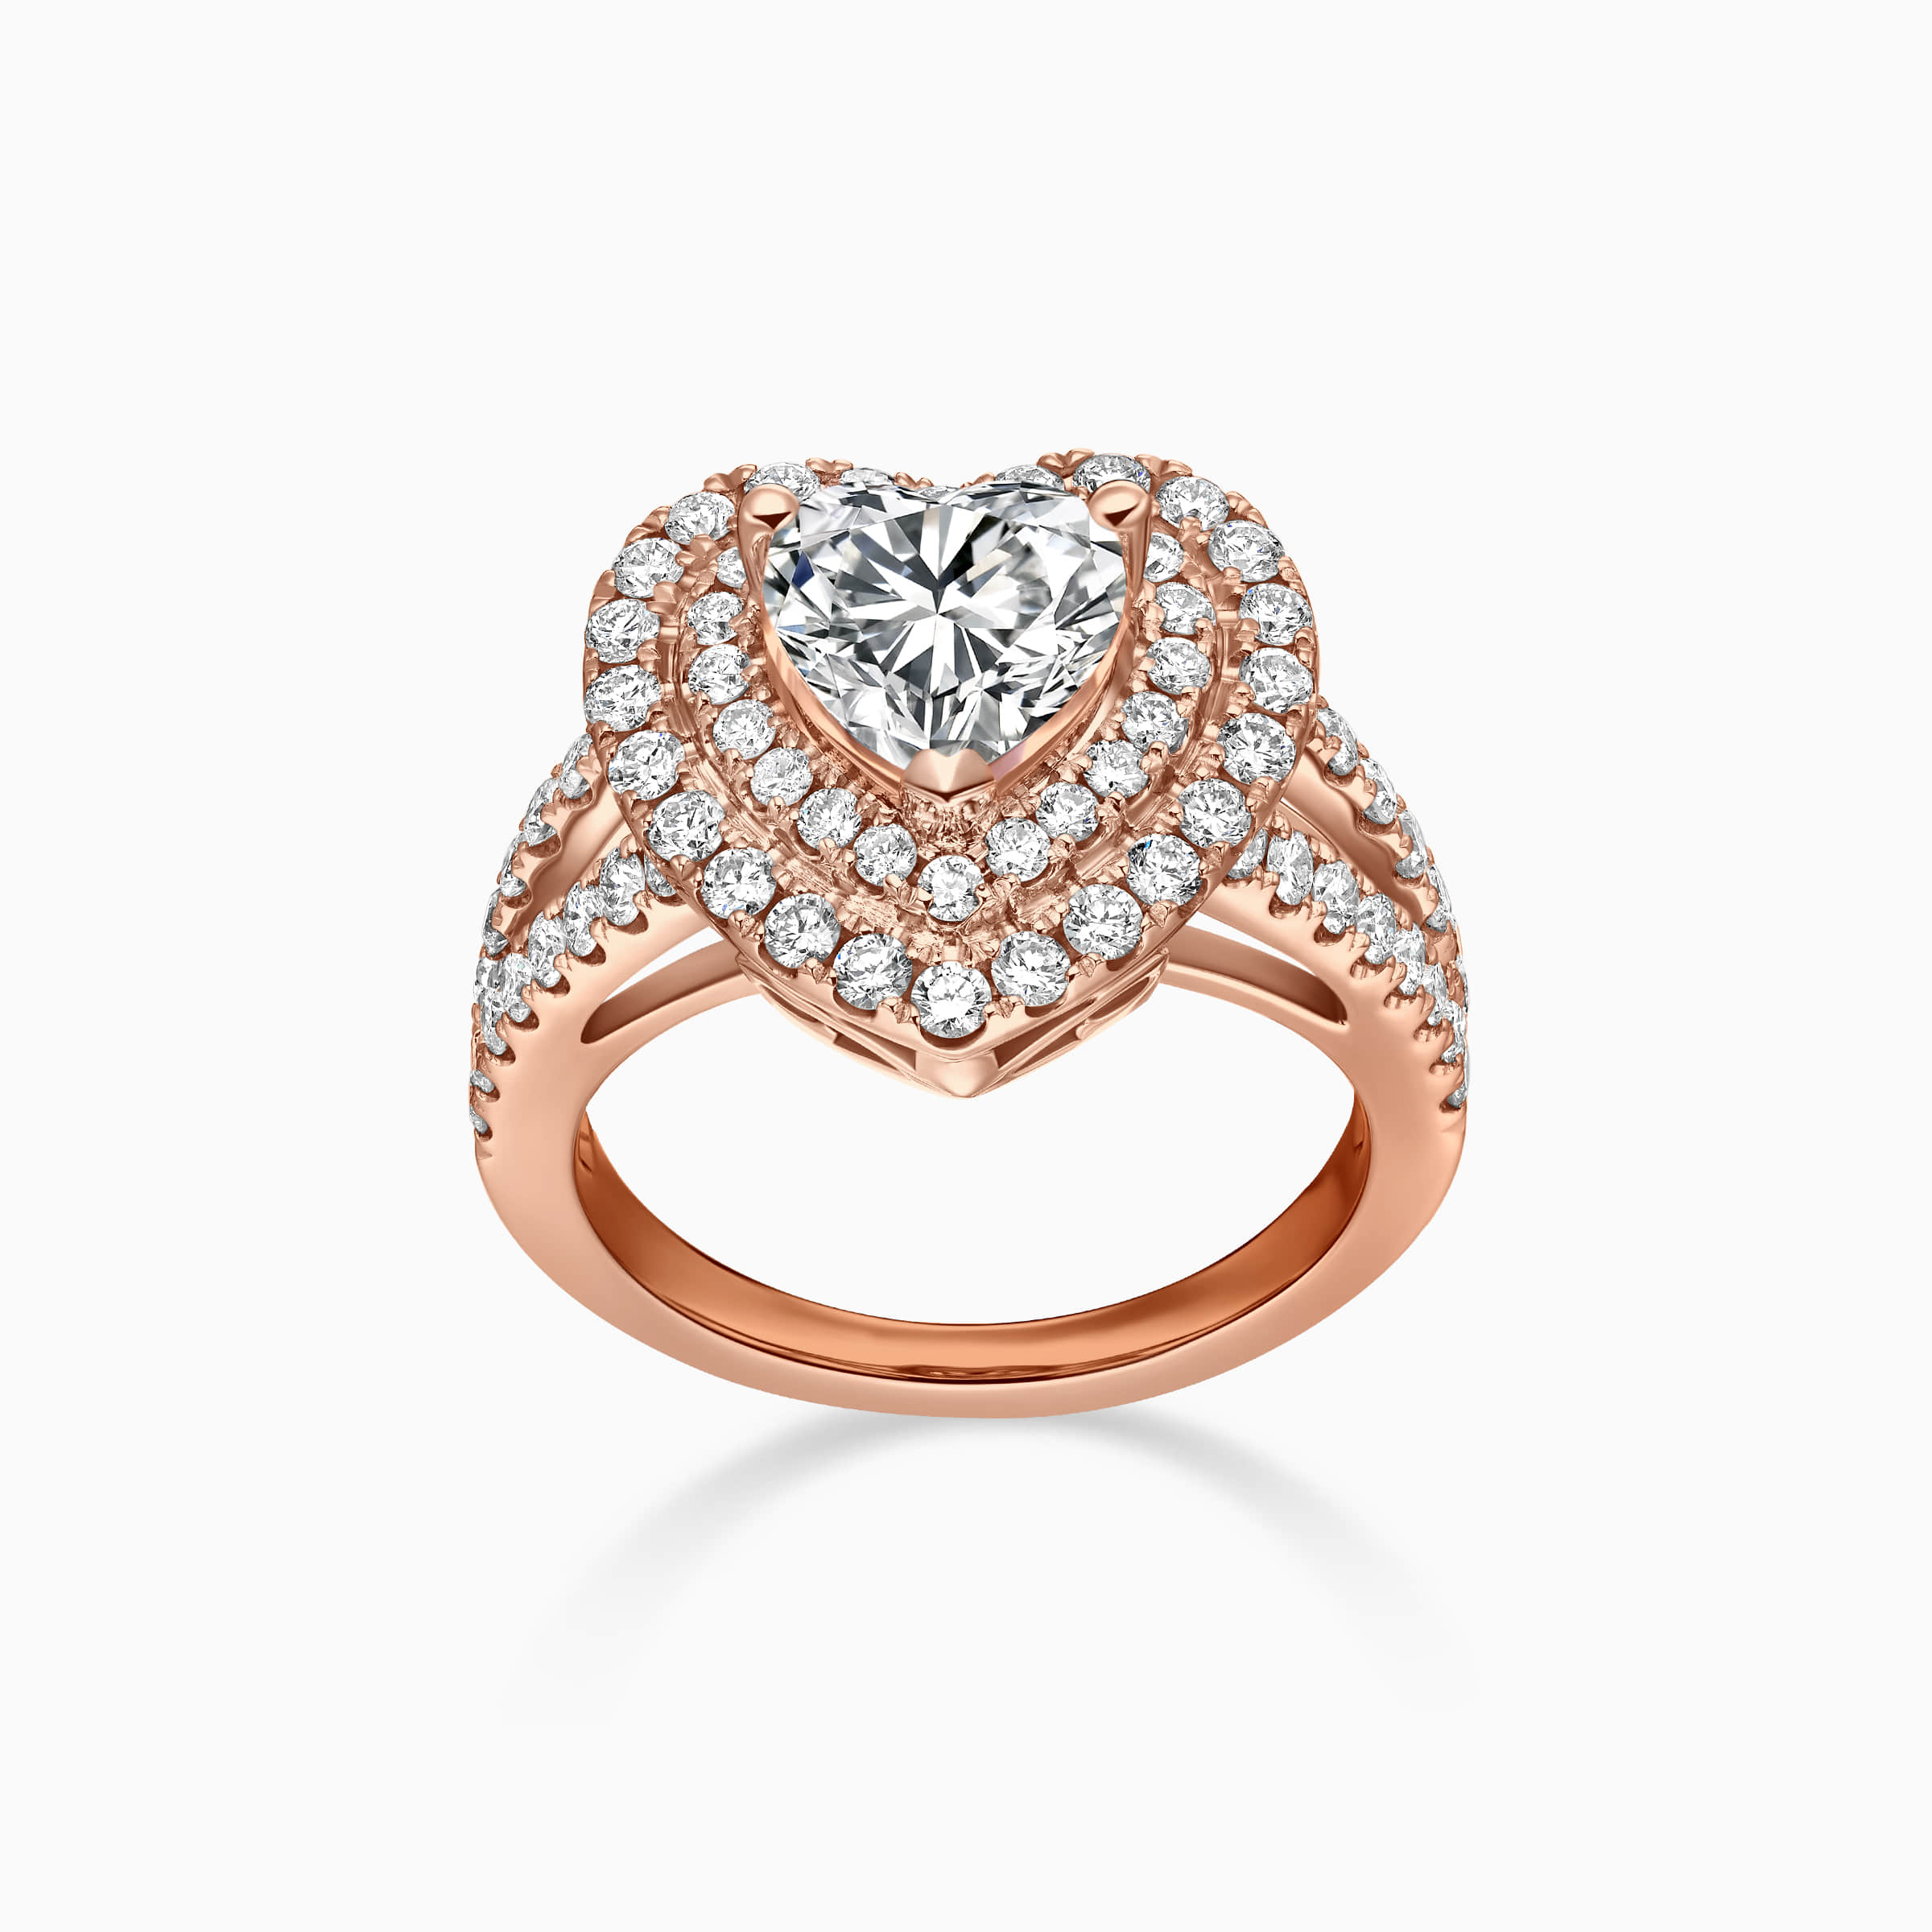 Darry Ring double halo heart promise ring in rose gold